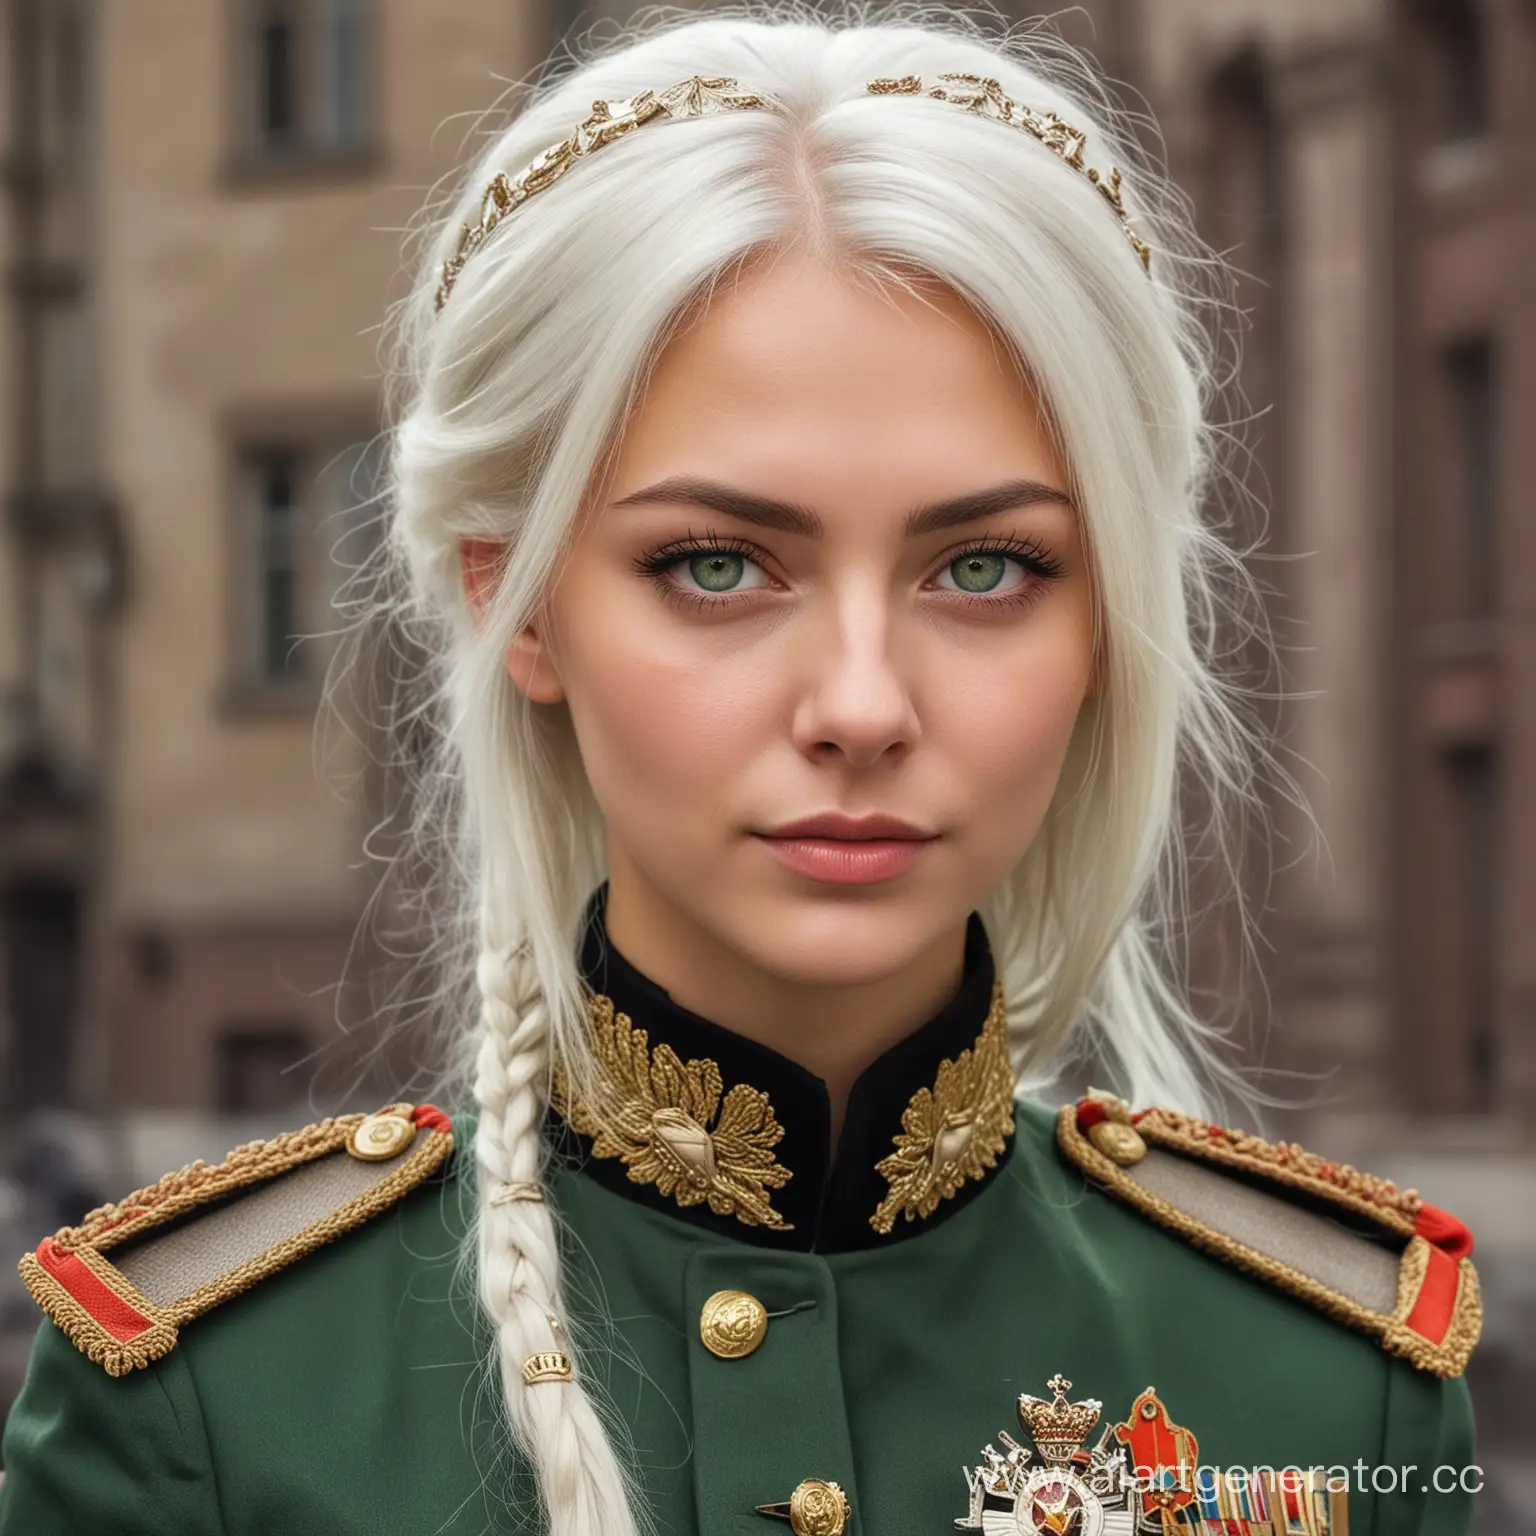 30YearOld-Girl-in-Russian-Empire-Military-Uniform-with-White-Hair-and-Green-Eyes